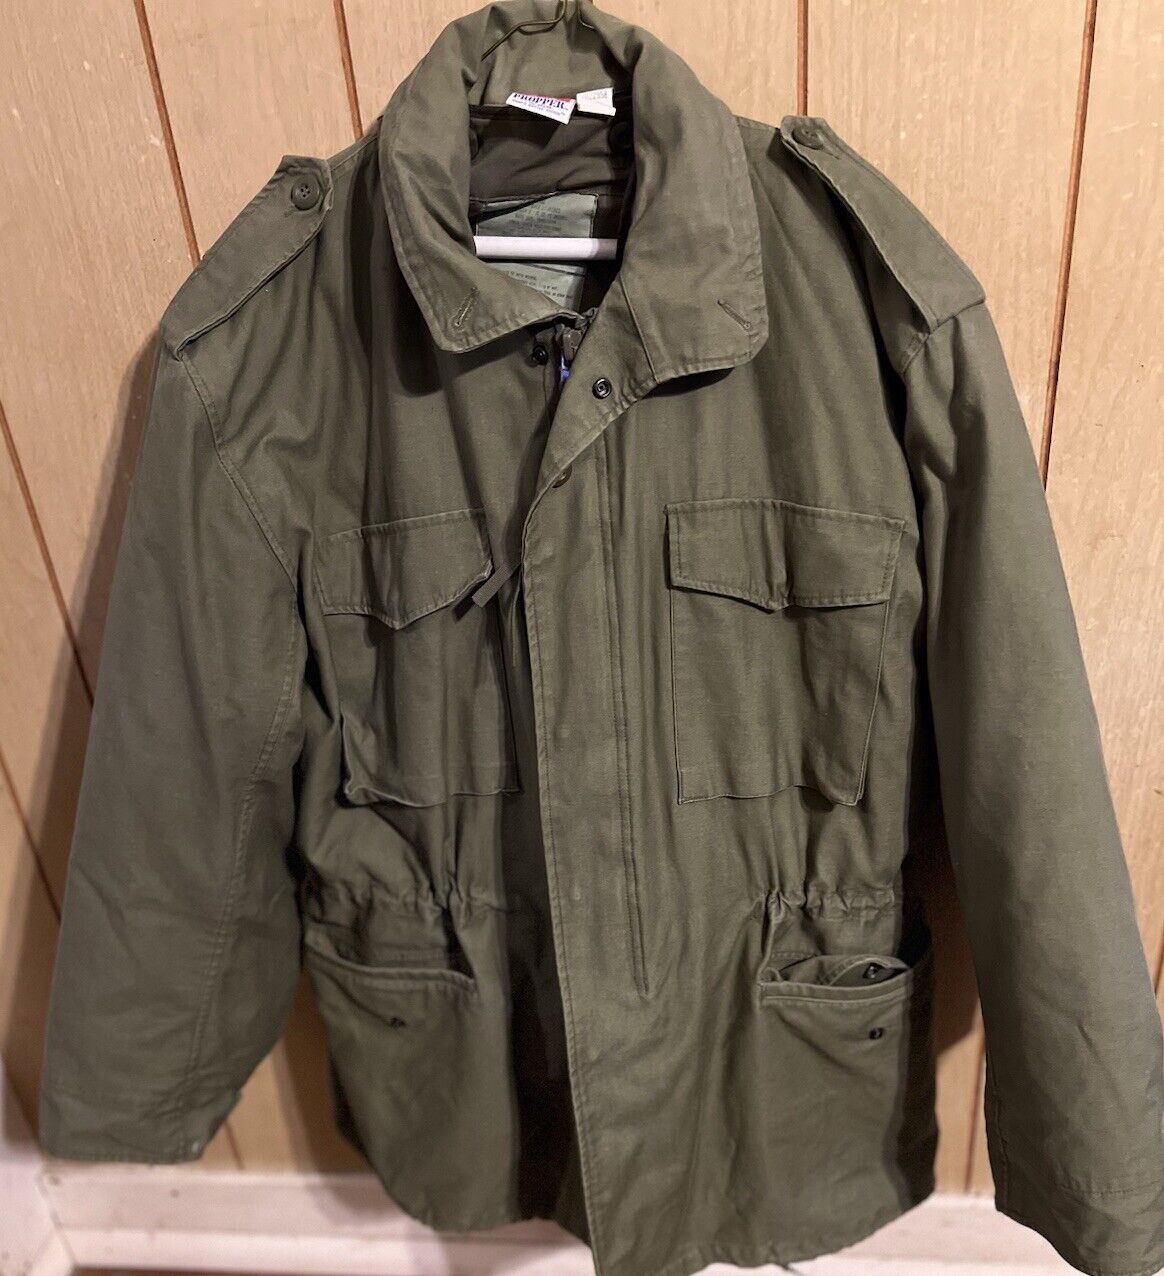 Vintage  US Military M65 Cold Weather Field Coat Jacket sz Large Long with liner